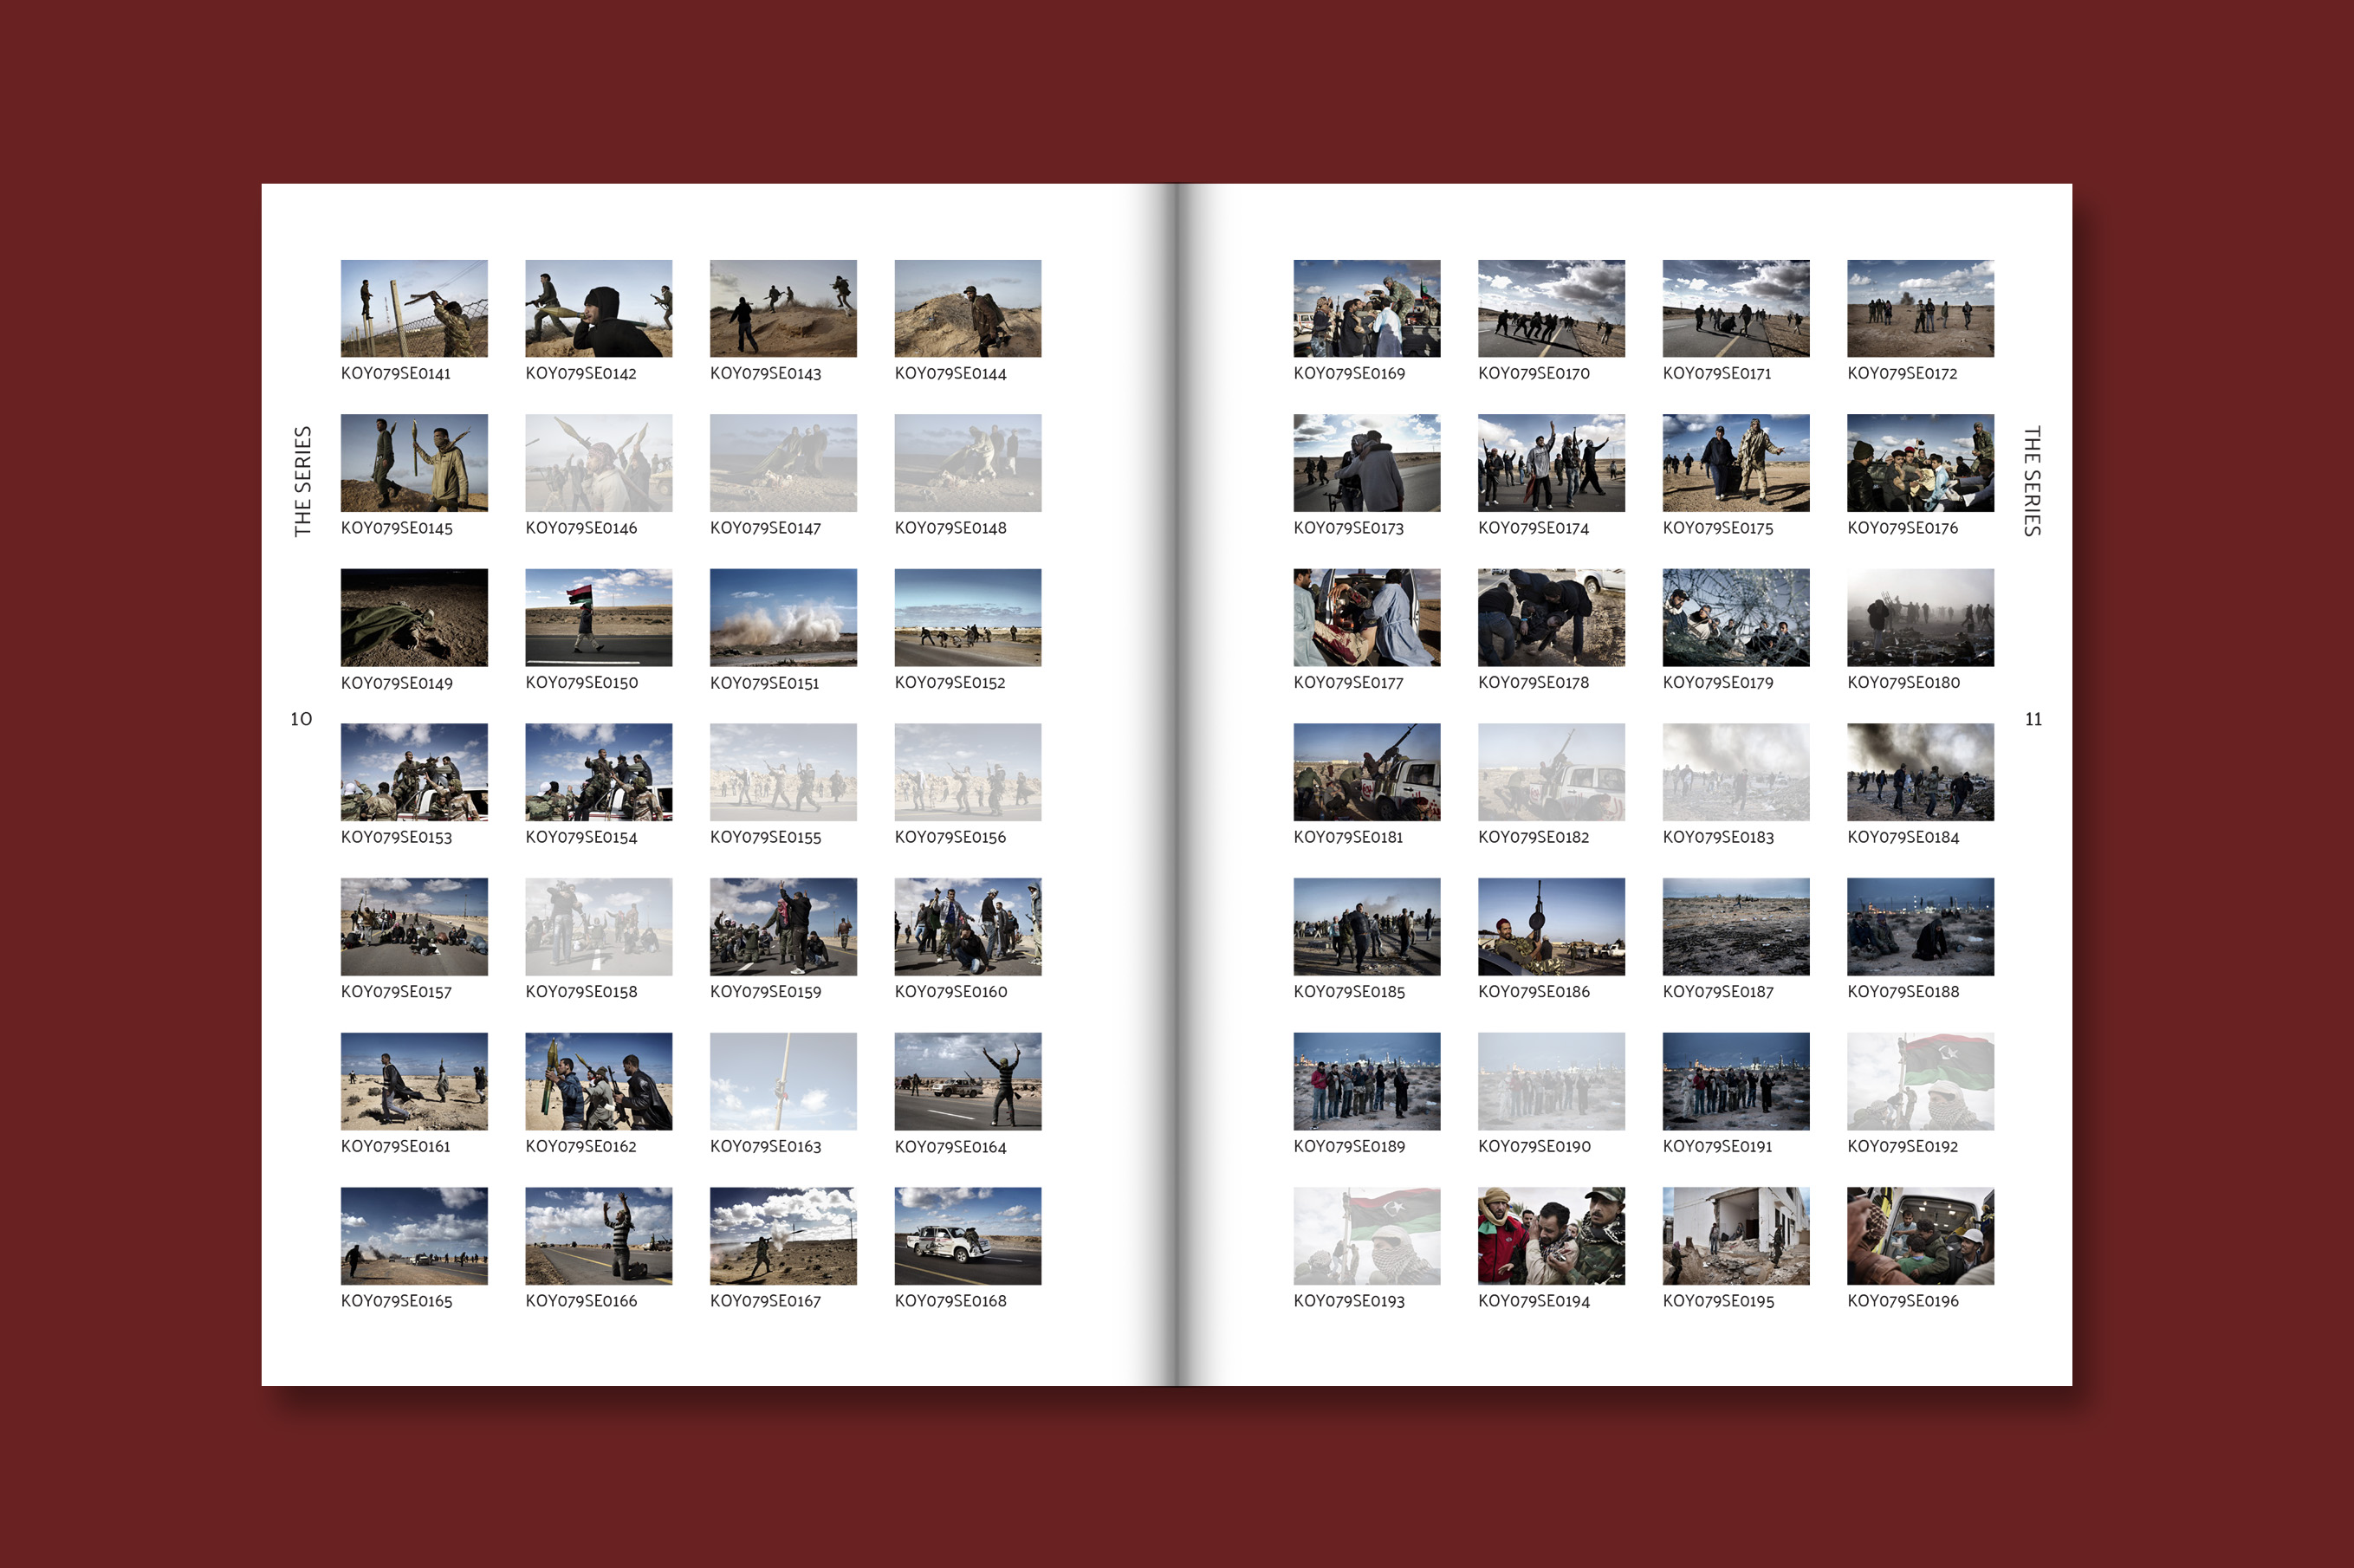 Book spread showing the first section which includes all of the photos from the series.